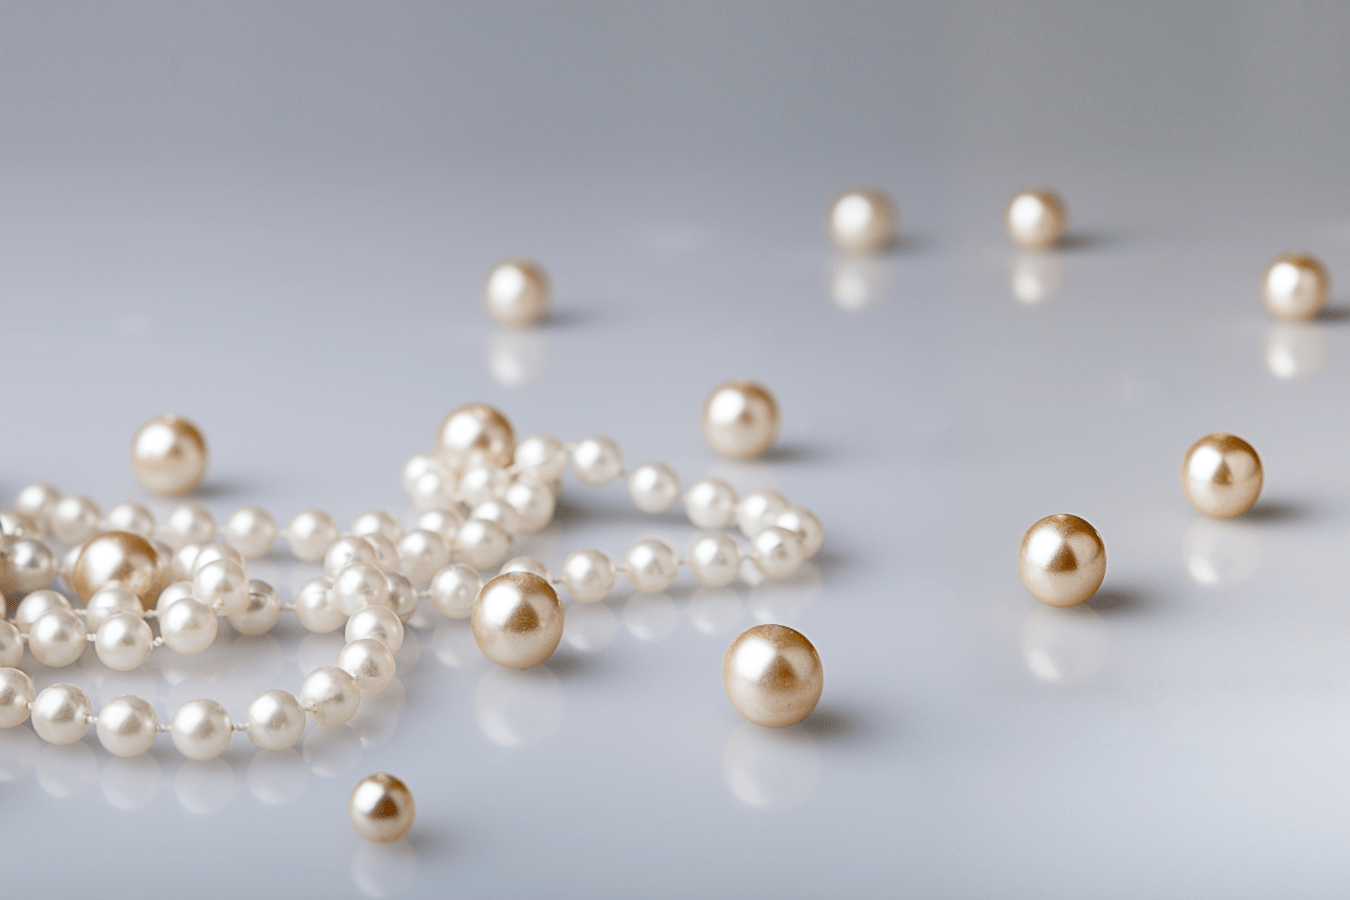 Dreaming of Pearls Meaning and Interpretation